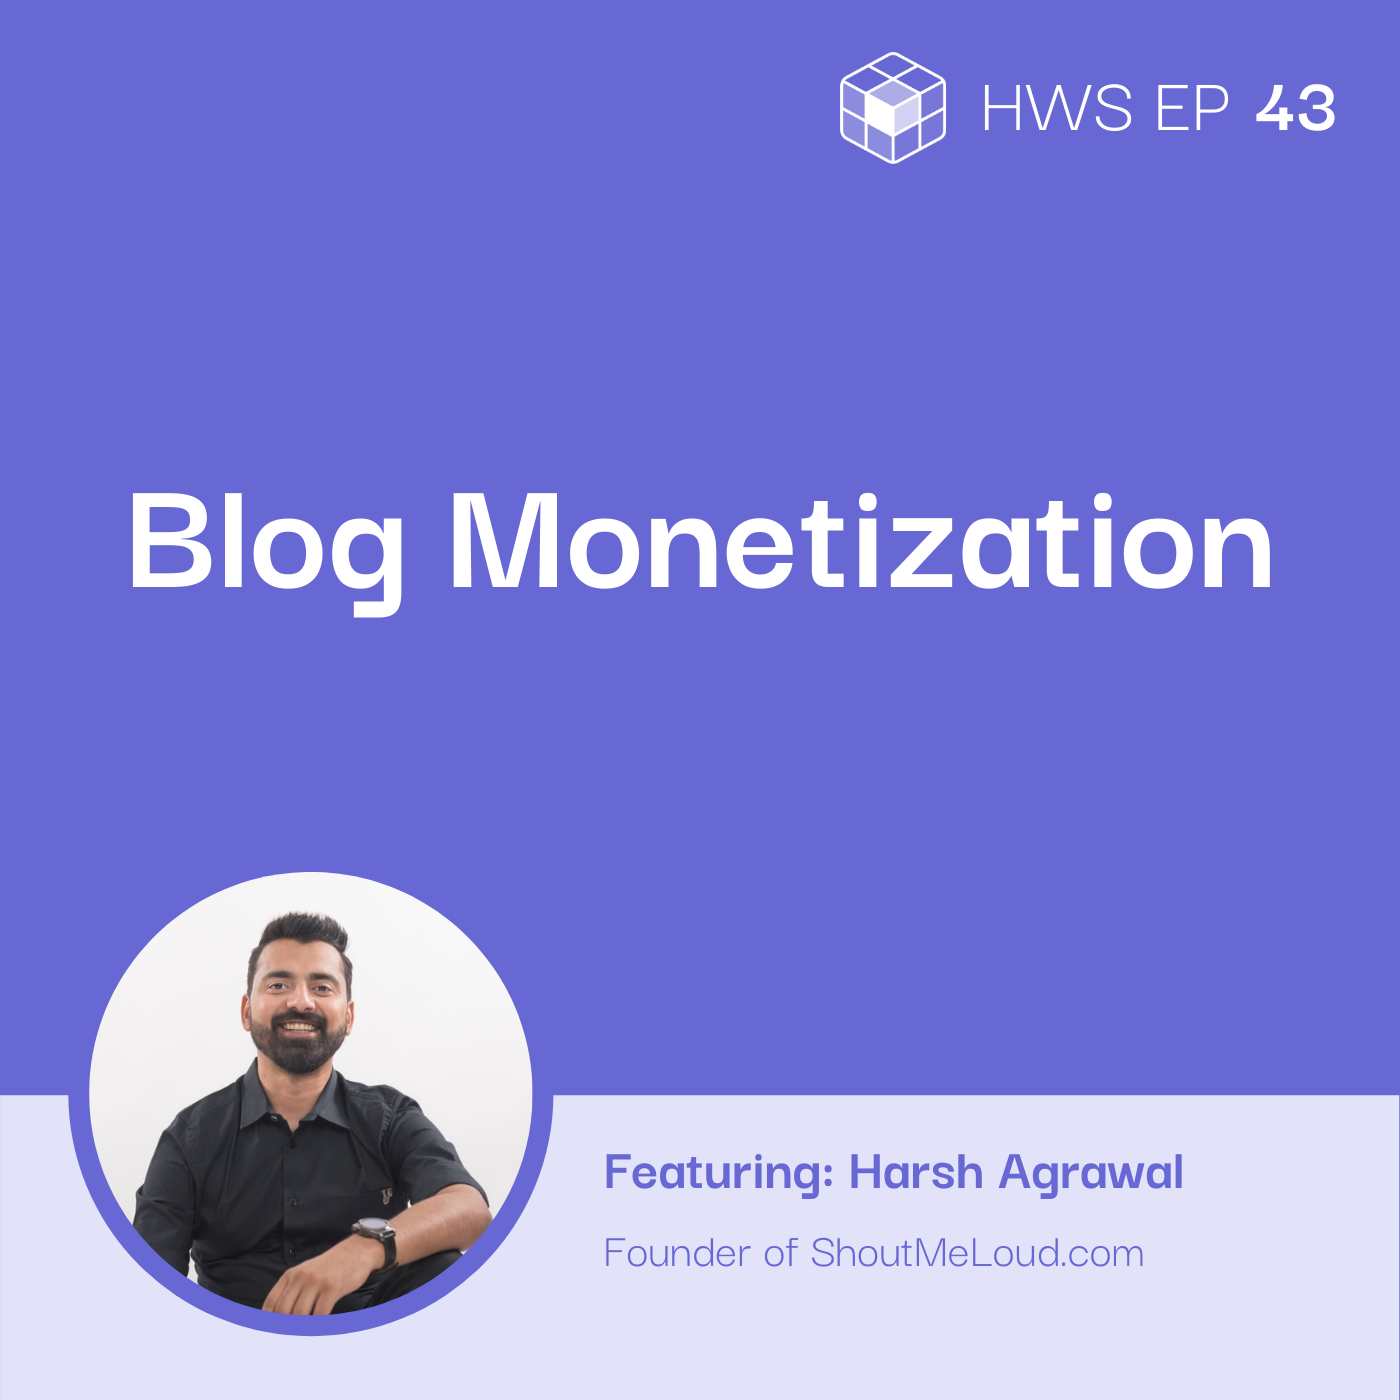 Harsh Agrawal on how to monetize your blog, his experience, and best practices